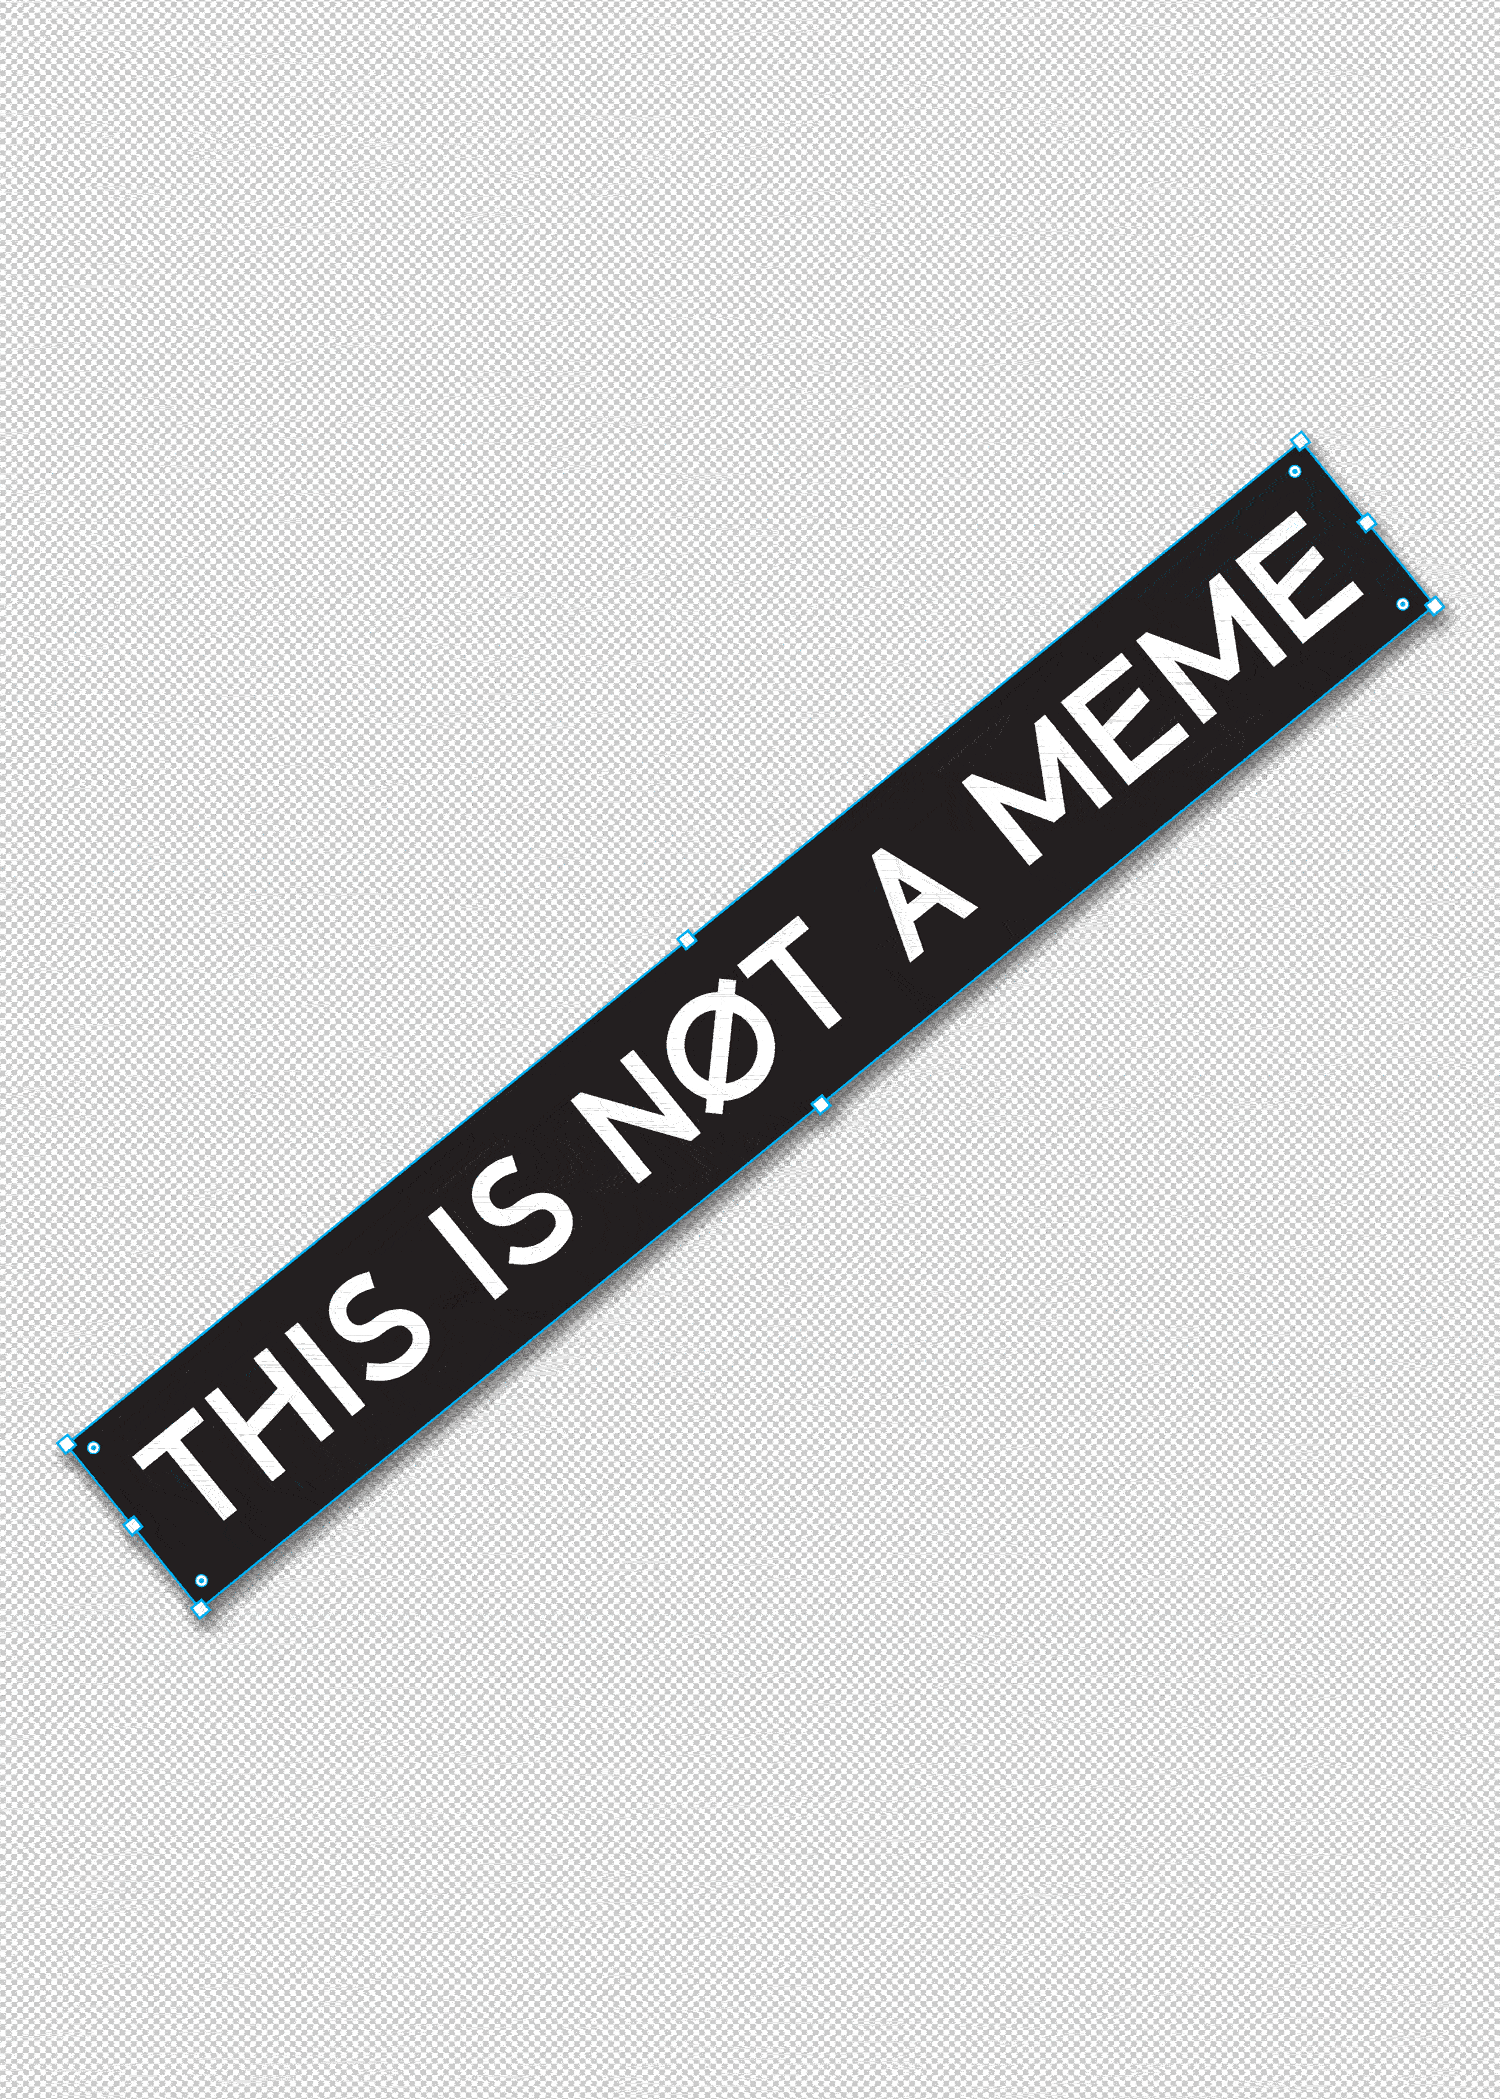 THIS IS NOT A MEME